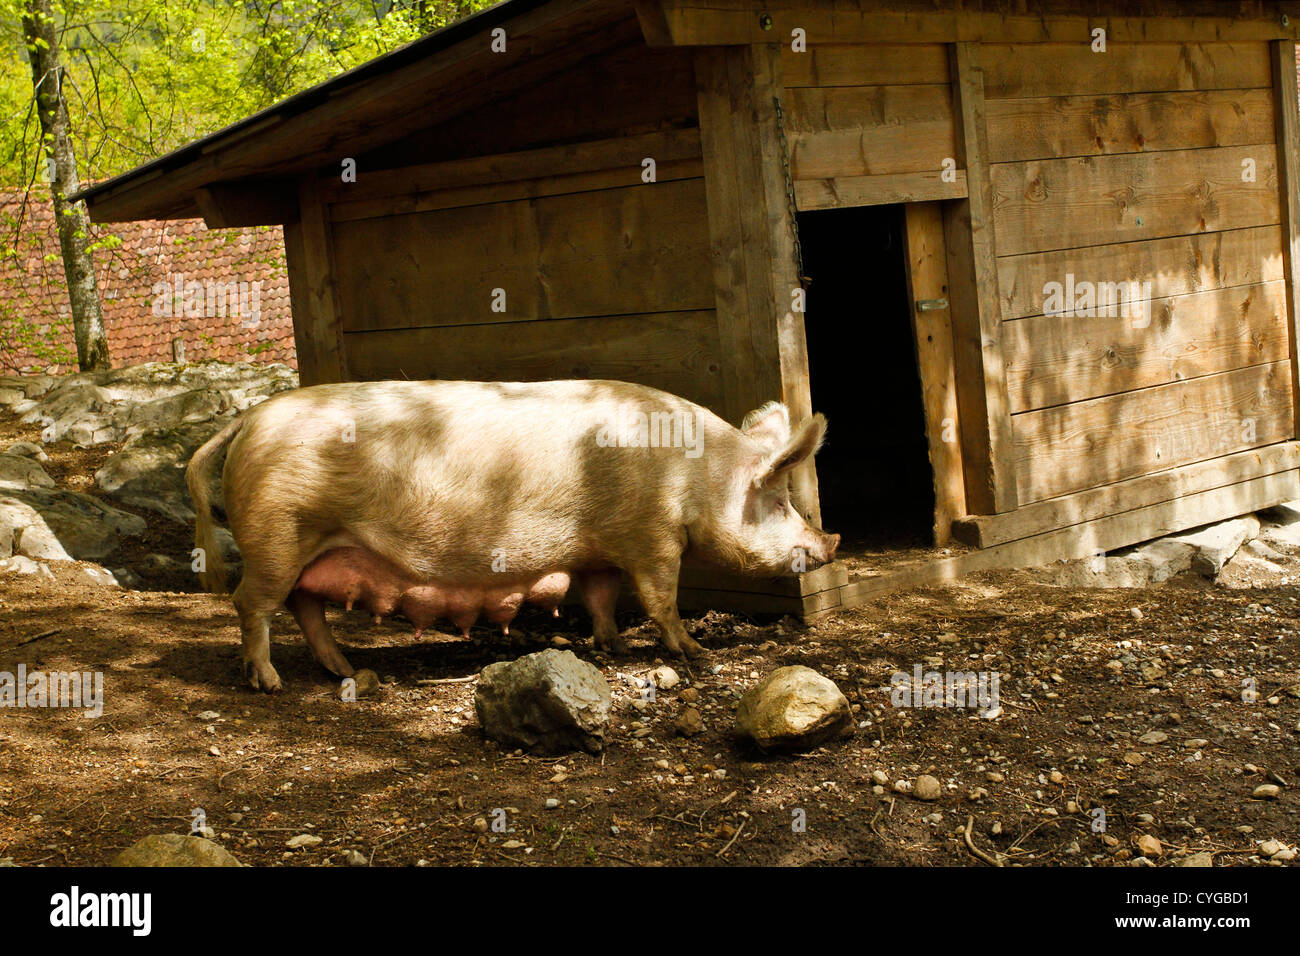 Sow pig showing large udders. Ballenberg open air Museum of Swiss folklife and architecture Stock Photo